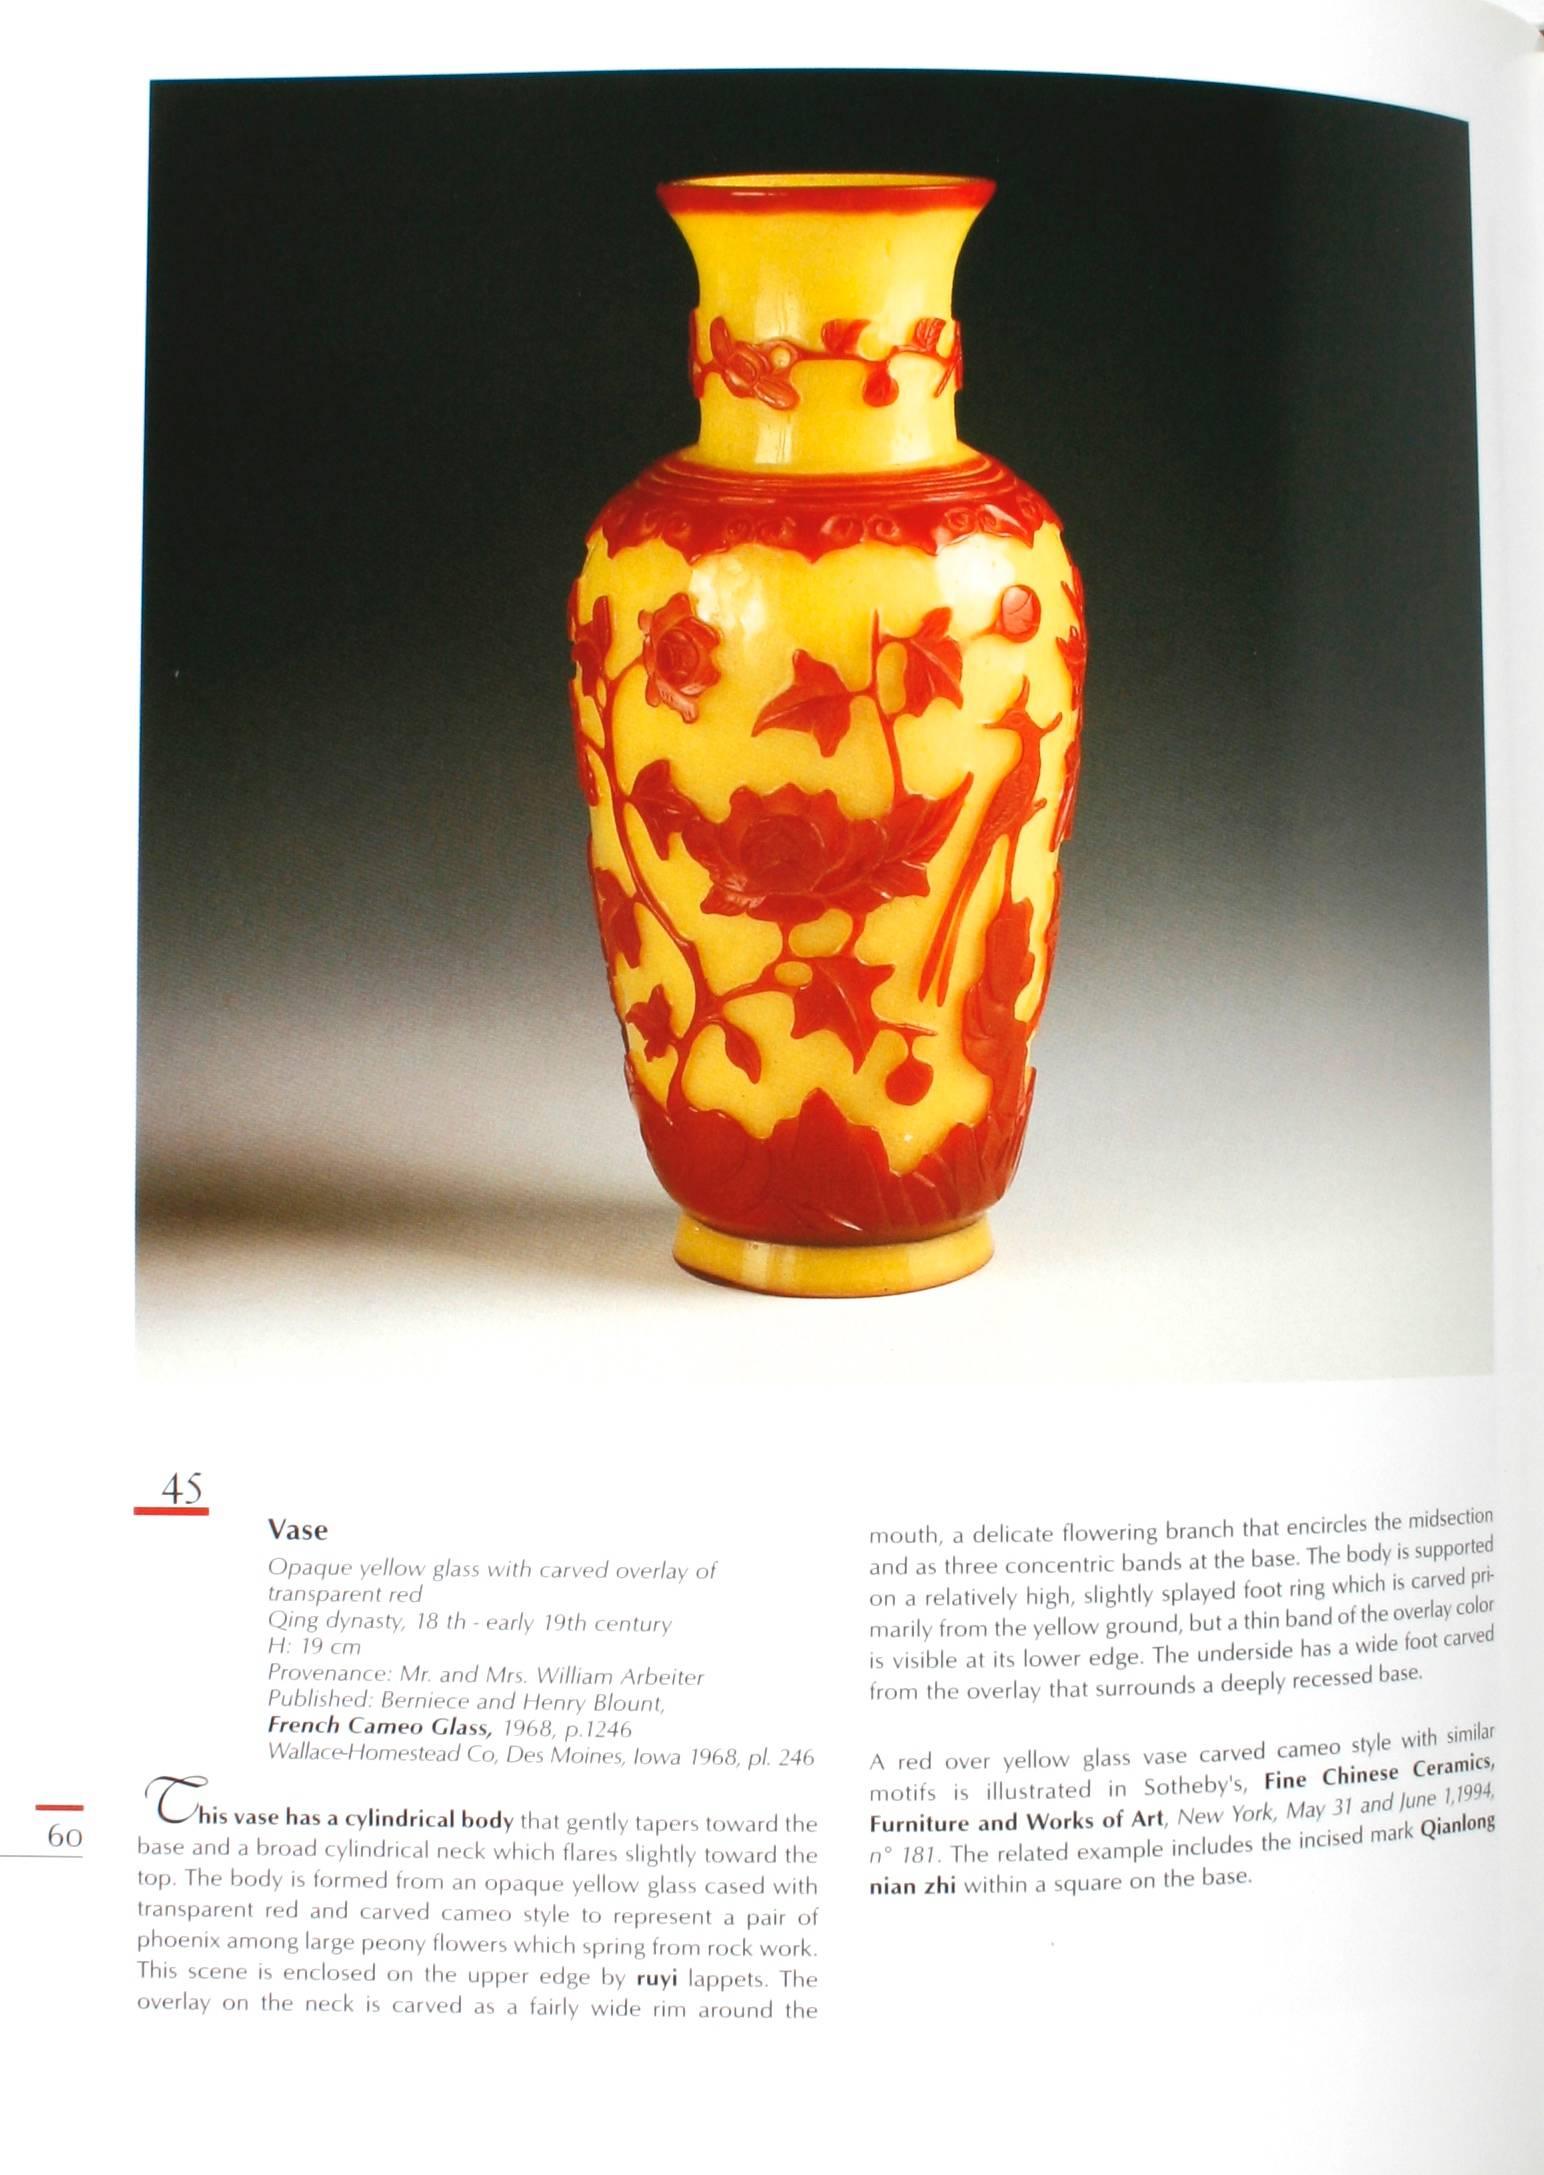 Paper Treasures of Chinese Glass Workshops, First Edition For Sale